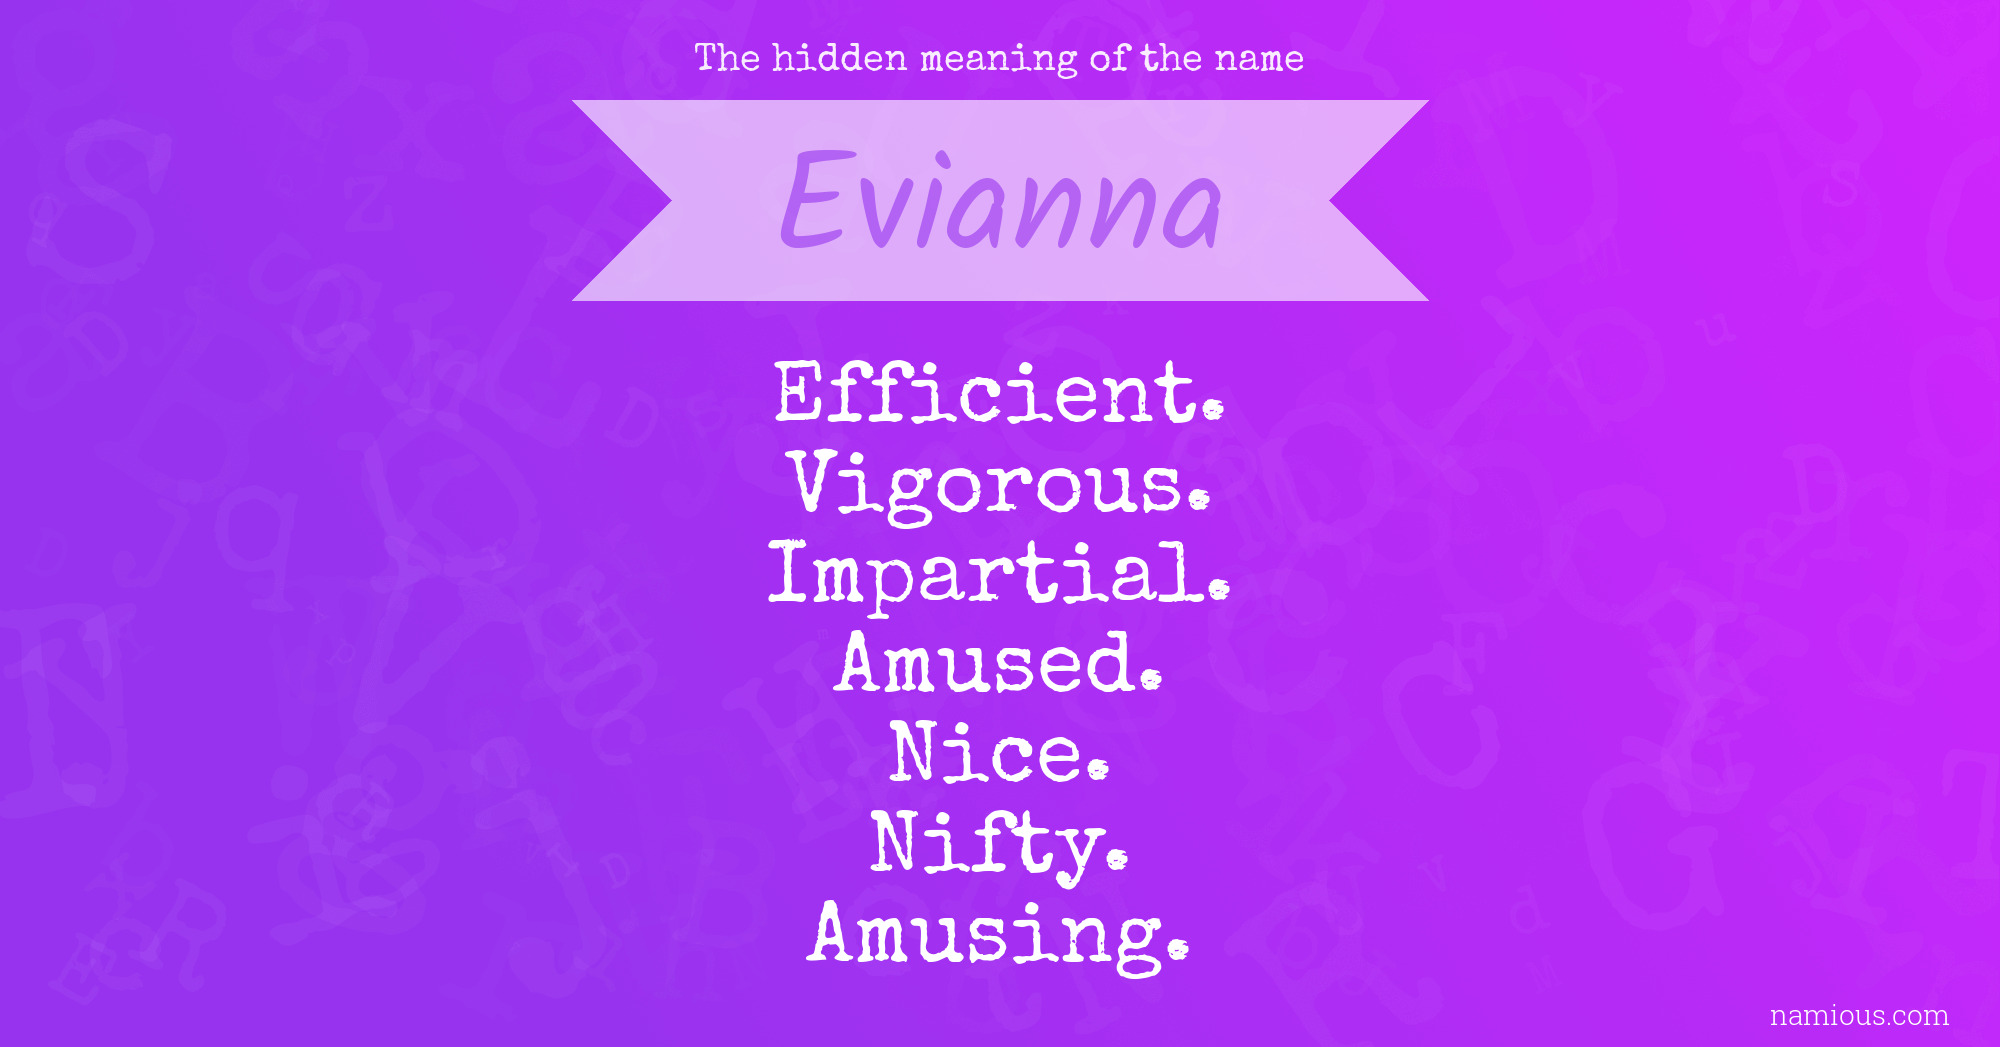 The hidden meaning of the name Evianna